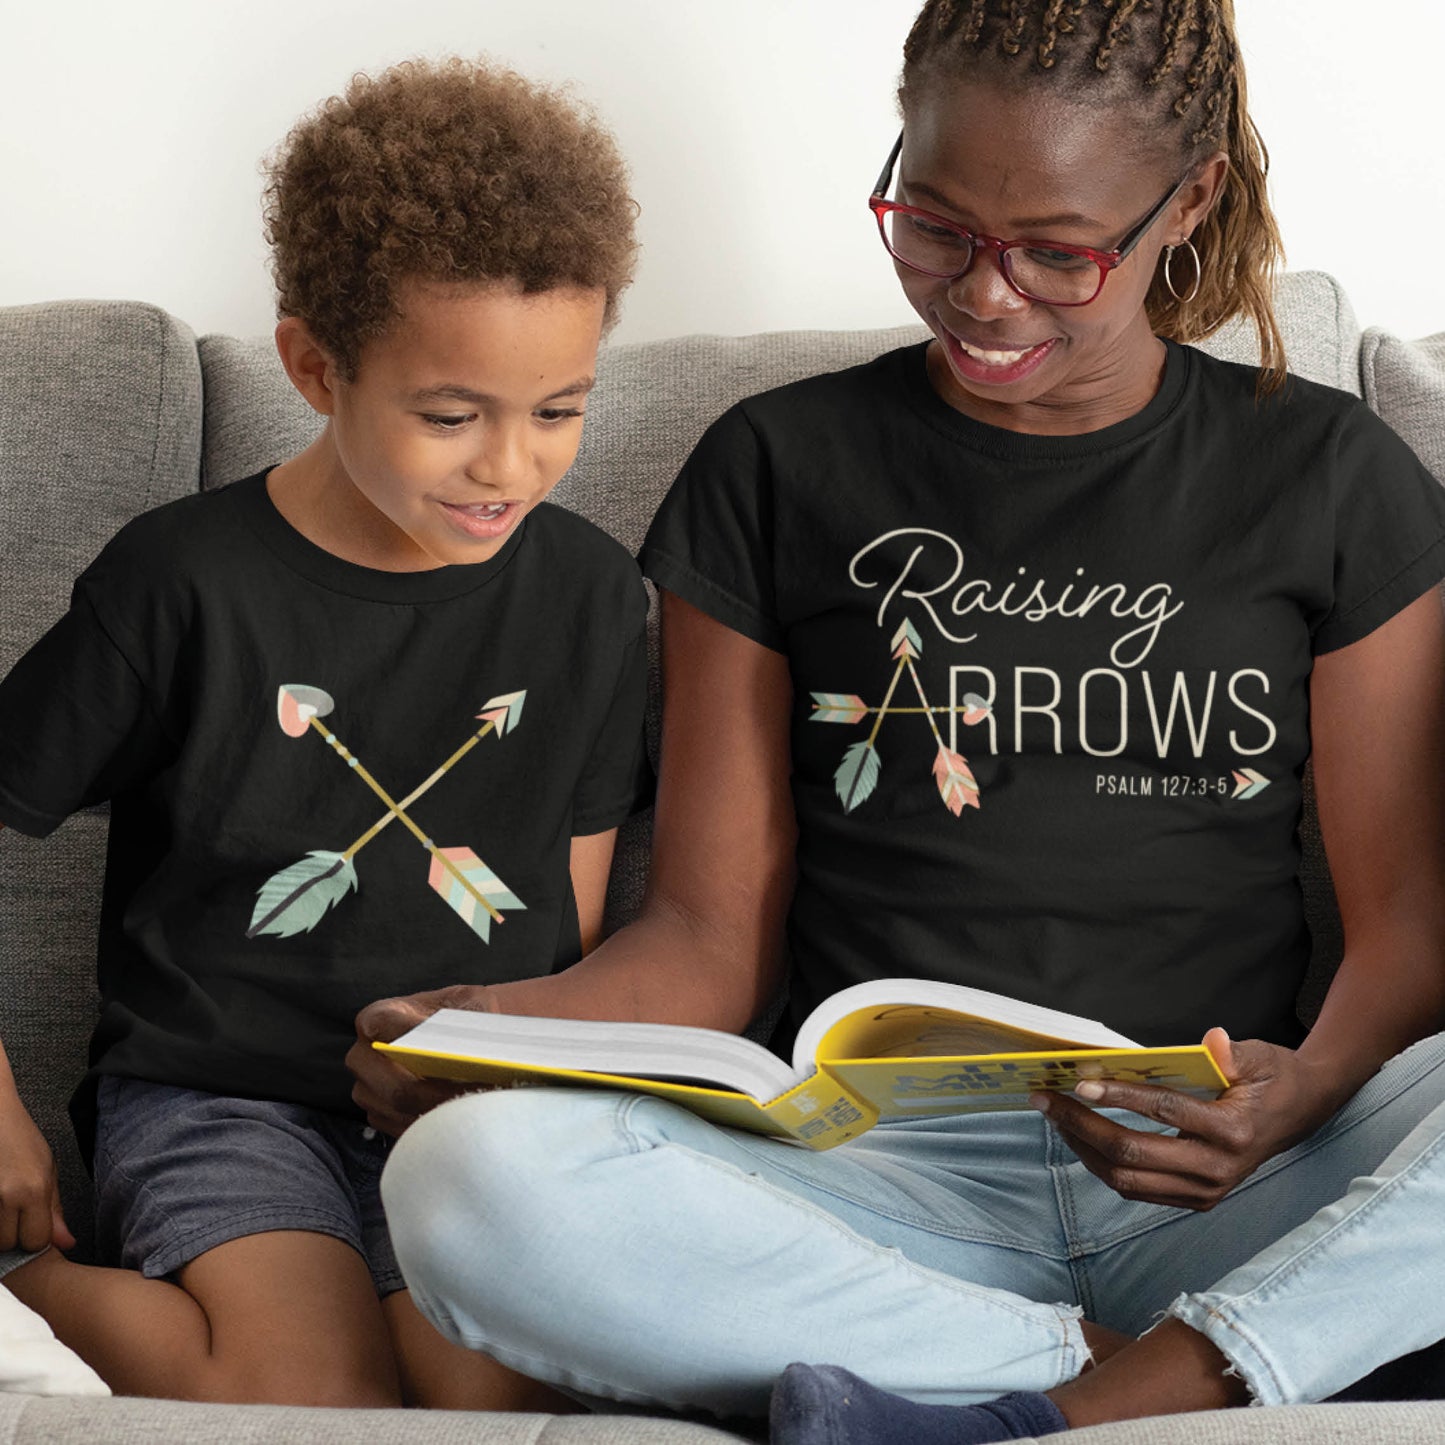 Black pastel boho arrow Christian aesthetic faith-based t-shirt and matching mommy-and-me youth toddler tee with Psalm 127:3-5 bible verse quote that says "Raising Arrows" blessed is the one with a quiver full of children, perfect for homeschool moms and kids